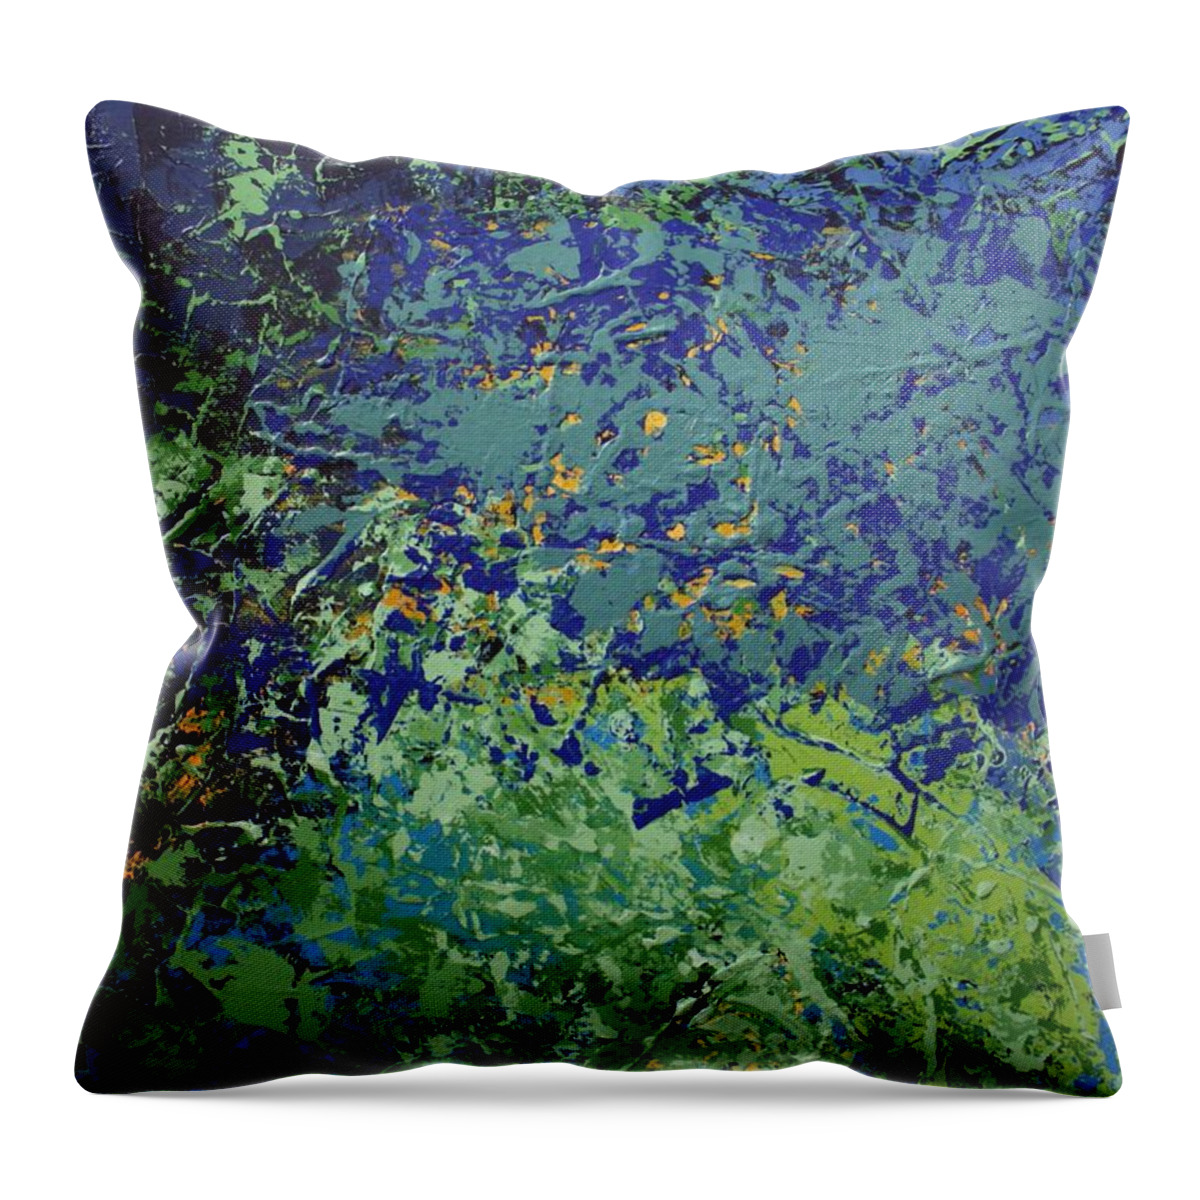 Pond Throw Pillow featuring the painting The Pond by Linda Bailey